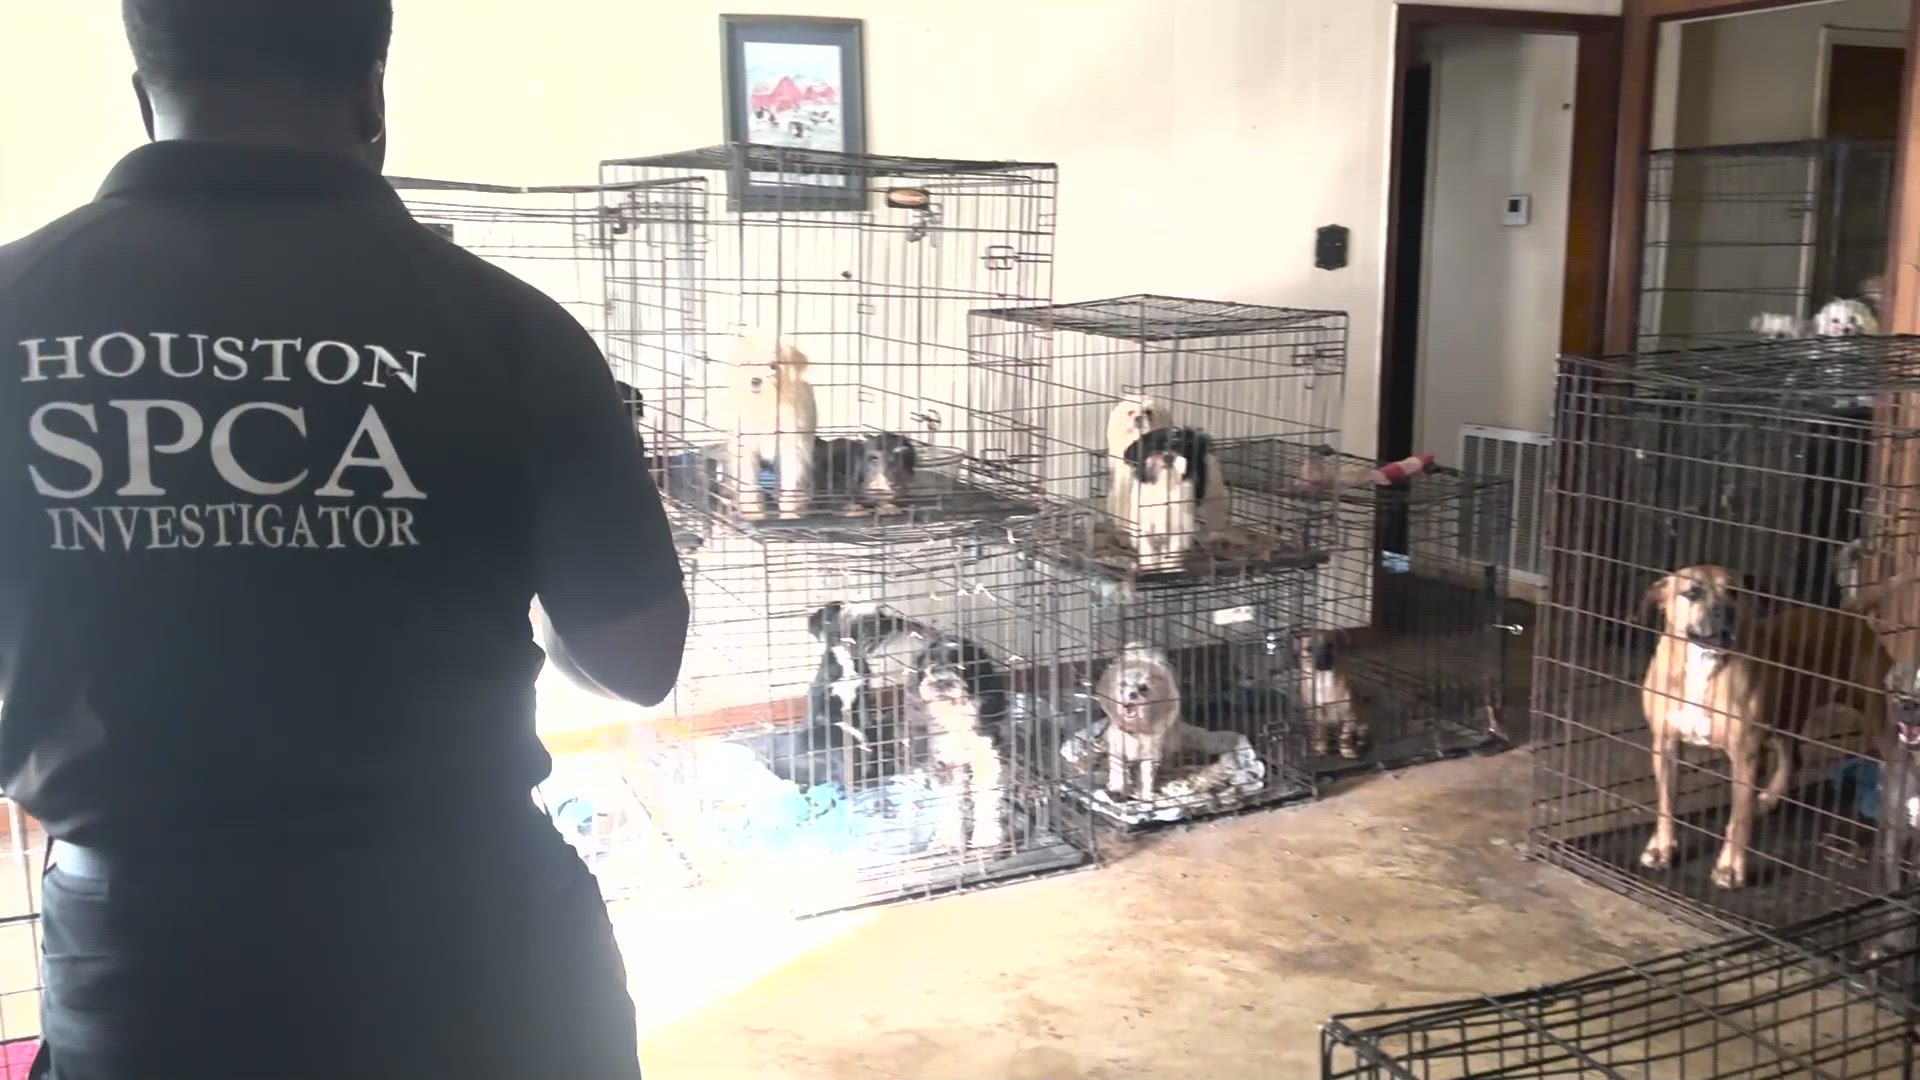 Sixty dogs were rescued Thursday, June 1 after they were found neglected inside a home in Manvel, according to the Houston SPCA.